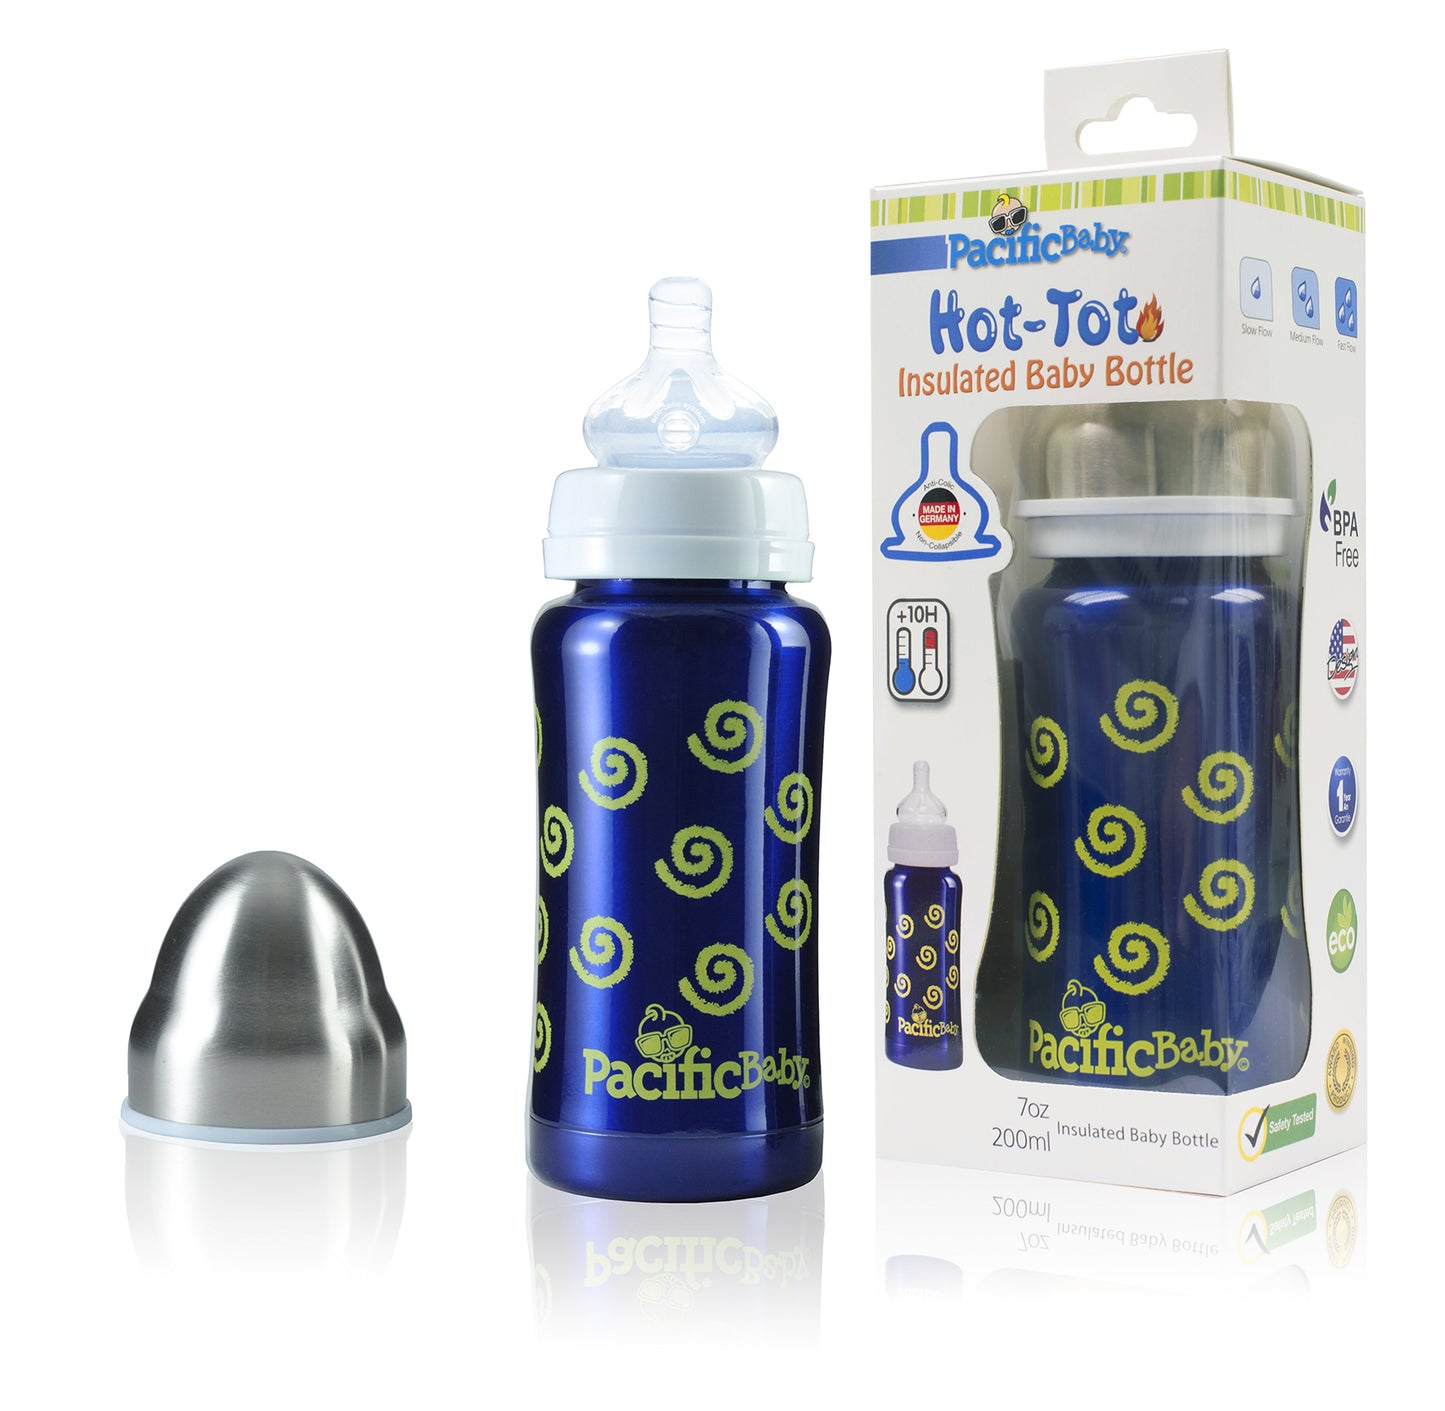 Pacific Baby Hot-Tot Stainless Steel Insulated Infant Baby 7 oz Eco Feeding Bottle Swirls